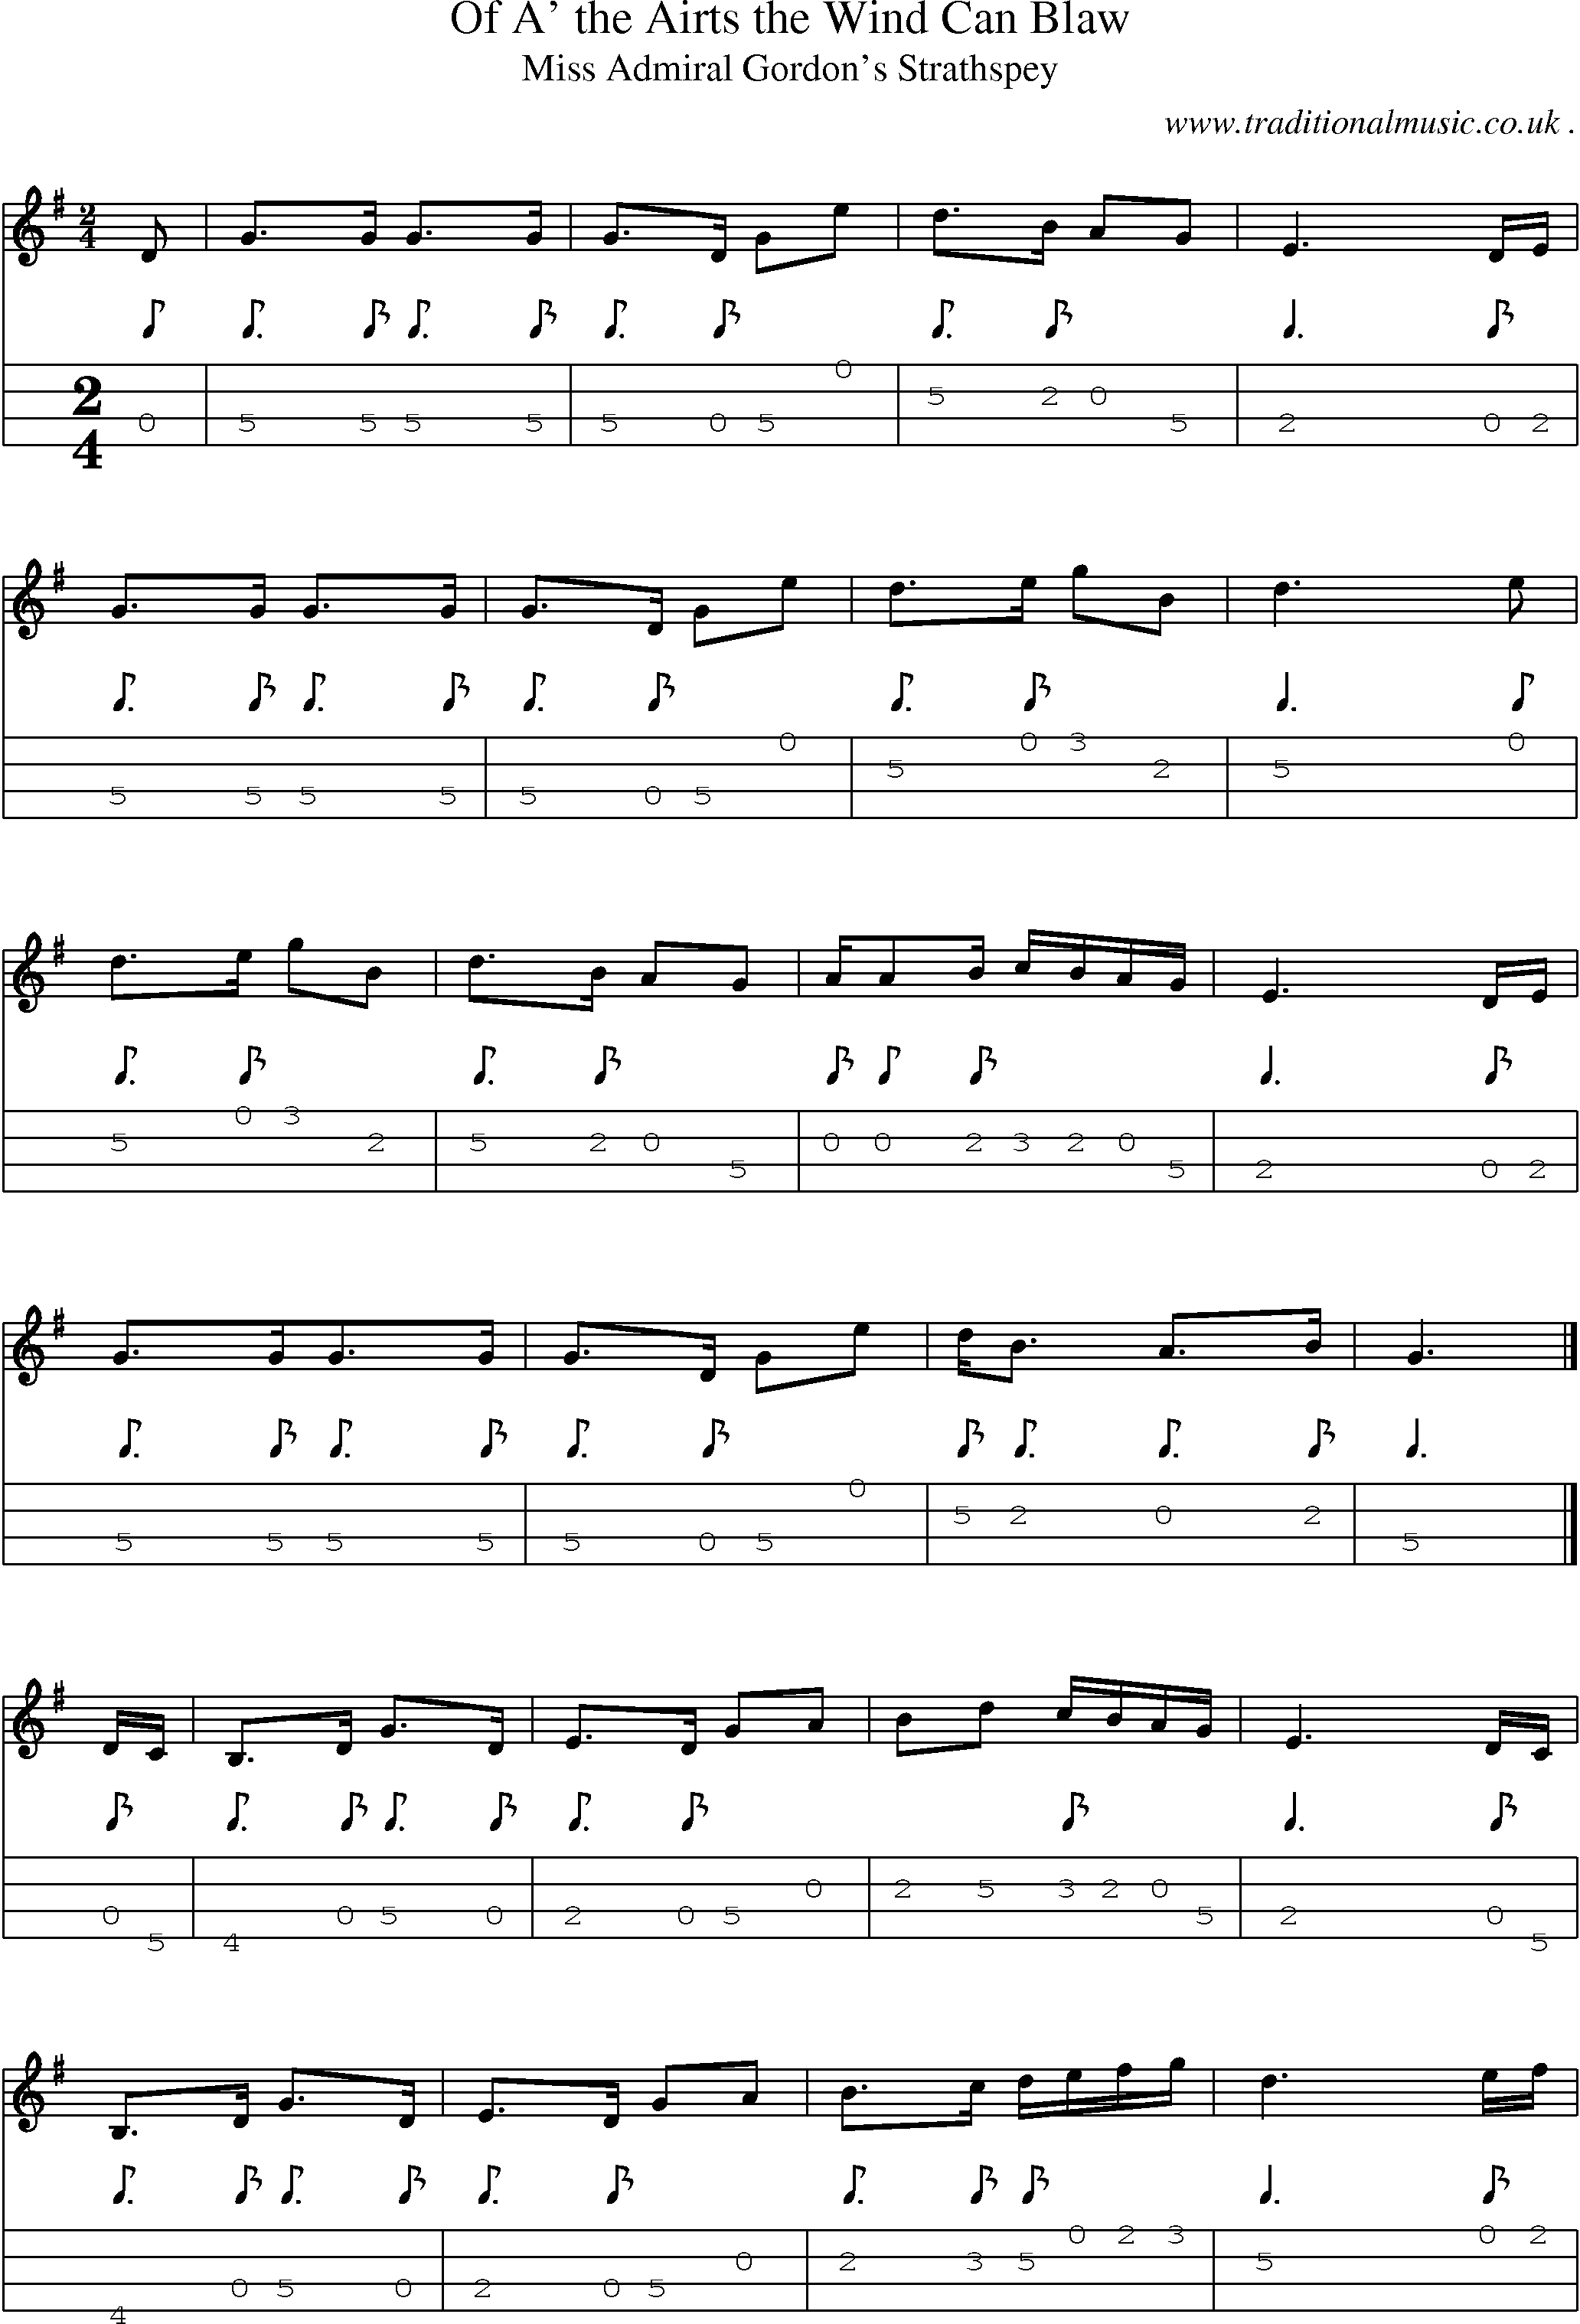 Sheet-music  score, Chords and Mandolin Tabs for Of A The Airts The Wind Can Blaw